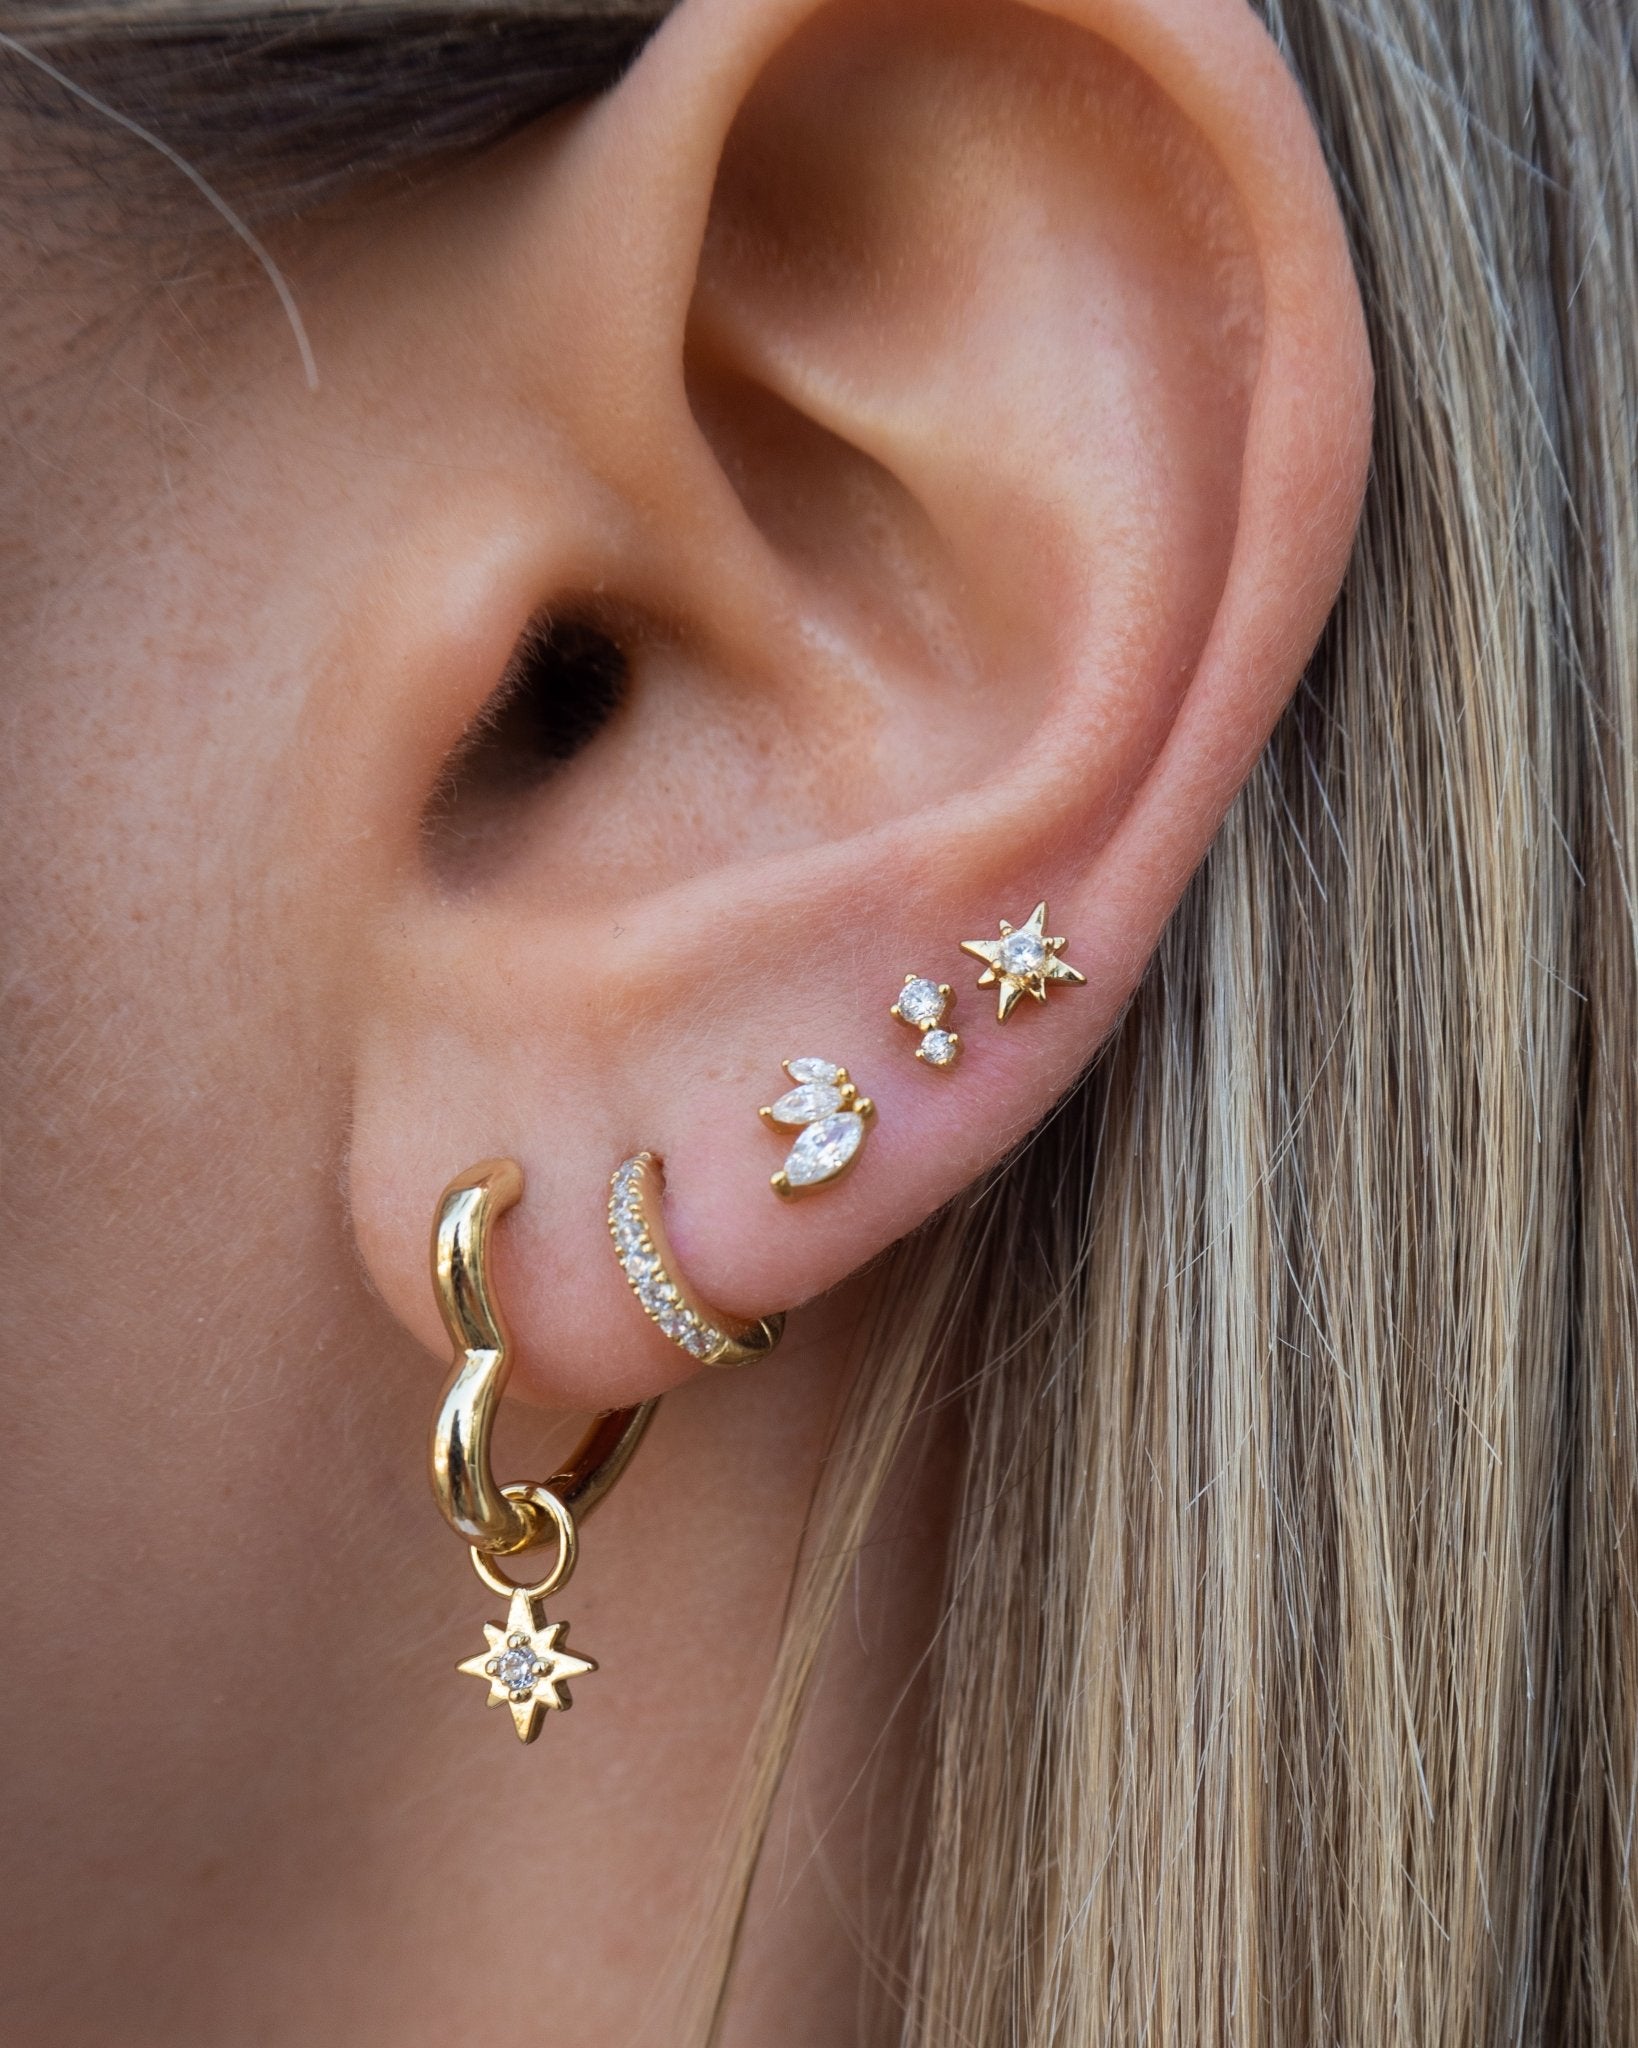 Emmy earrings - five and two jewelry